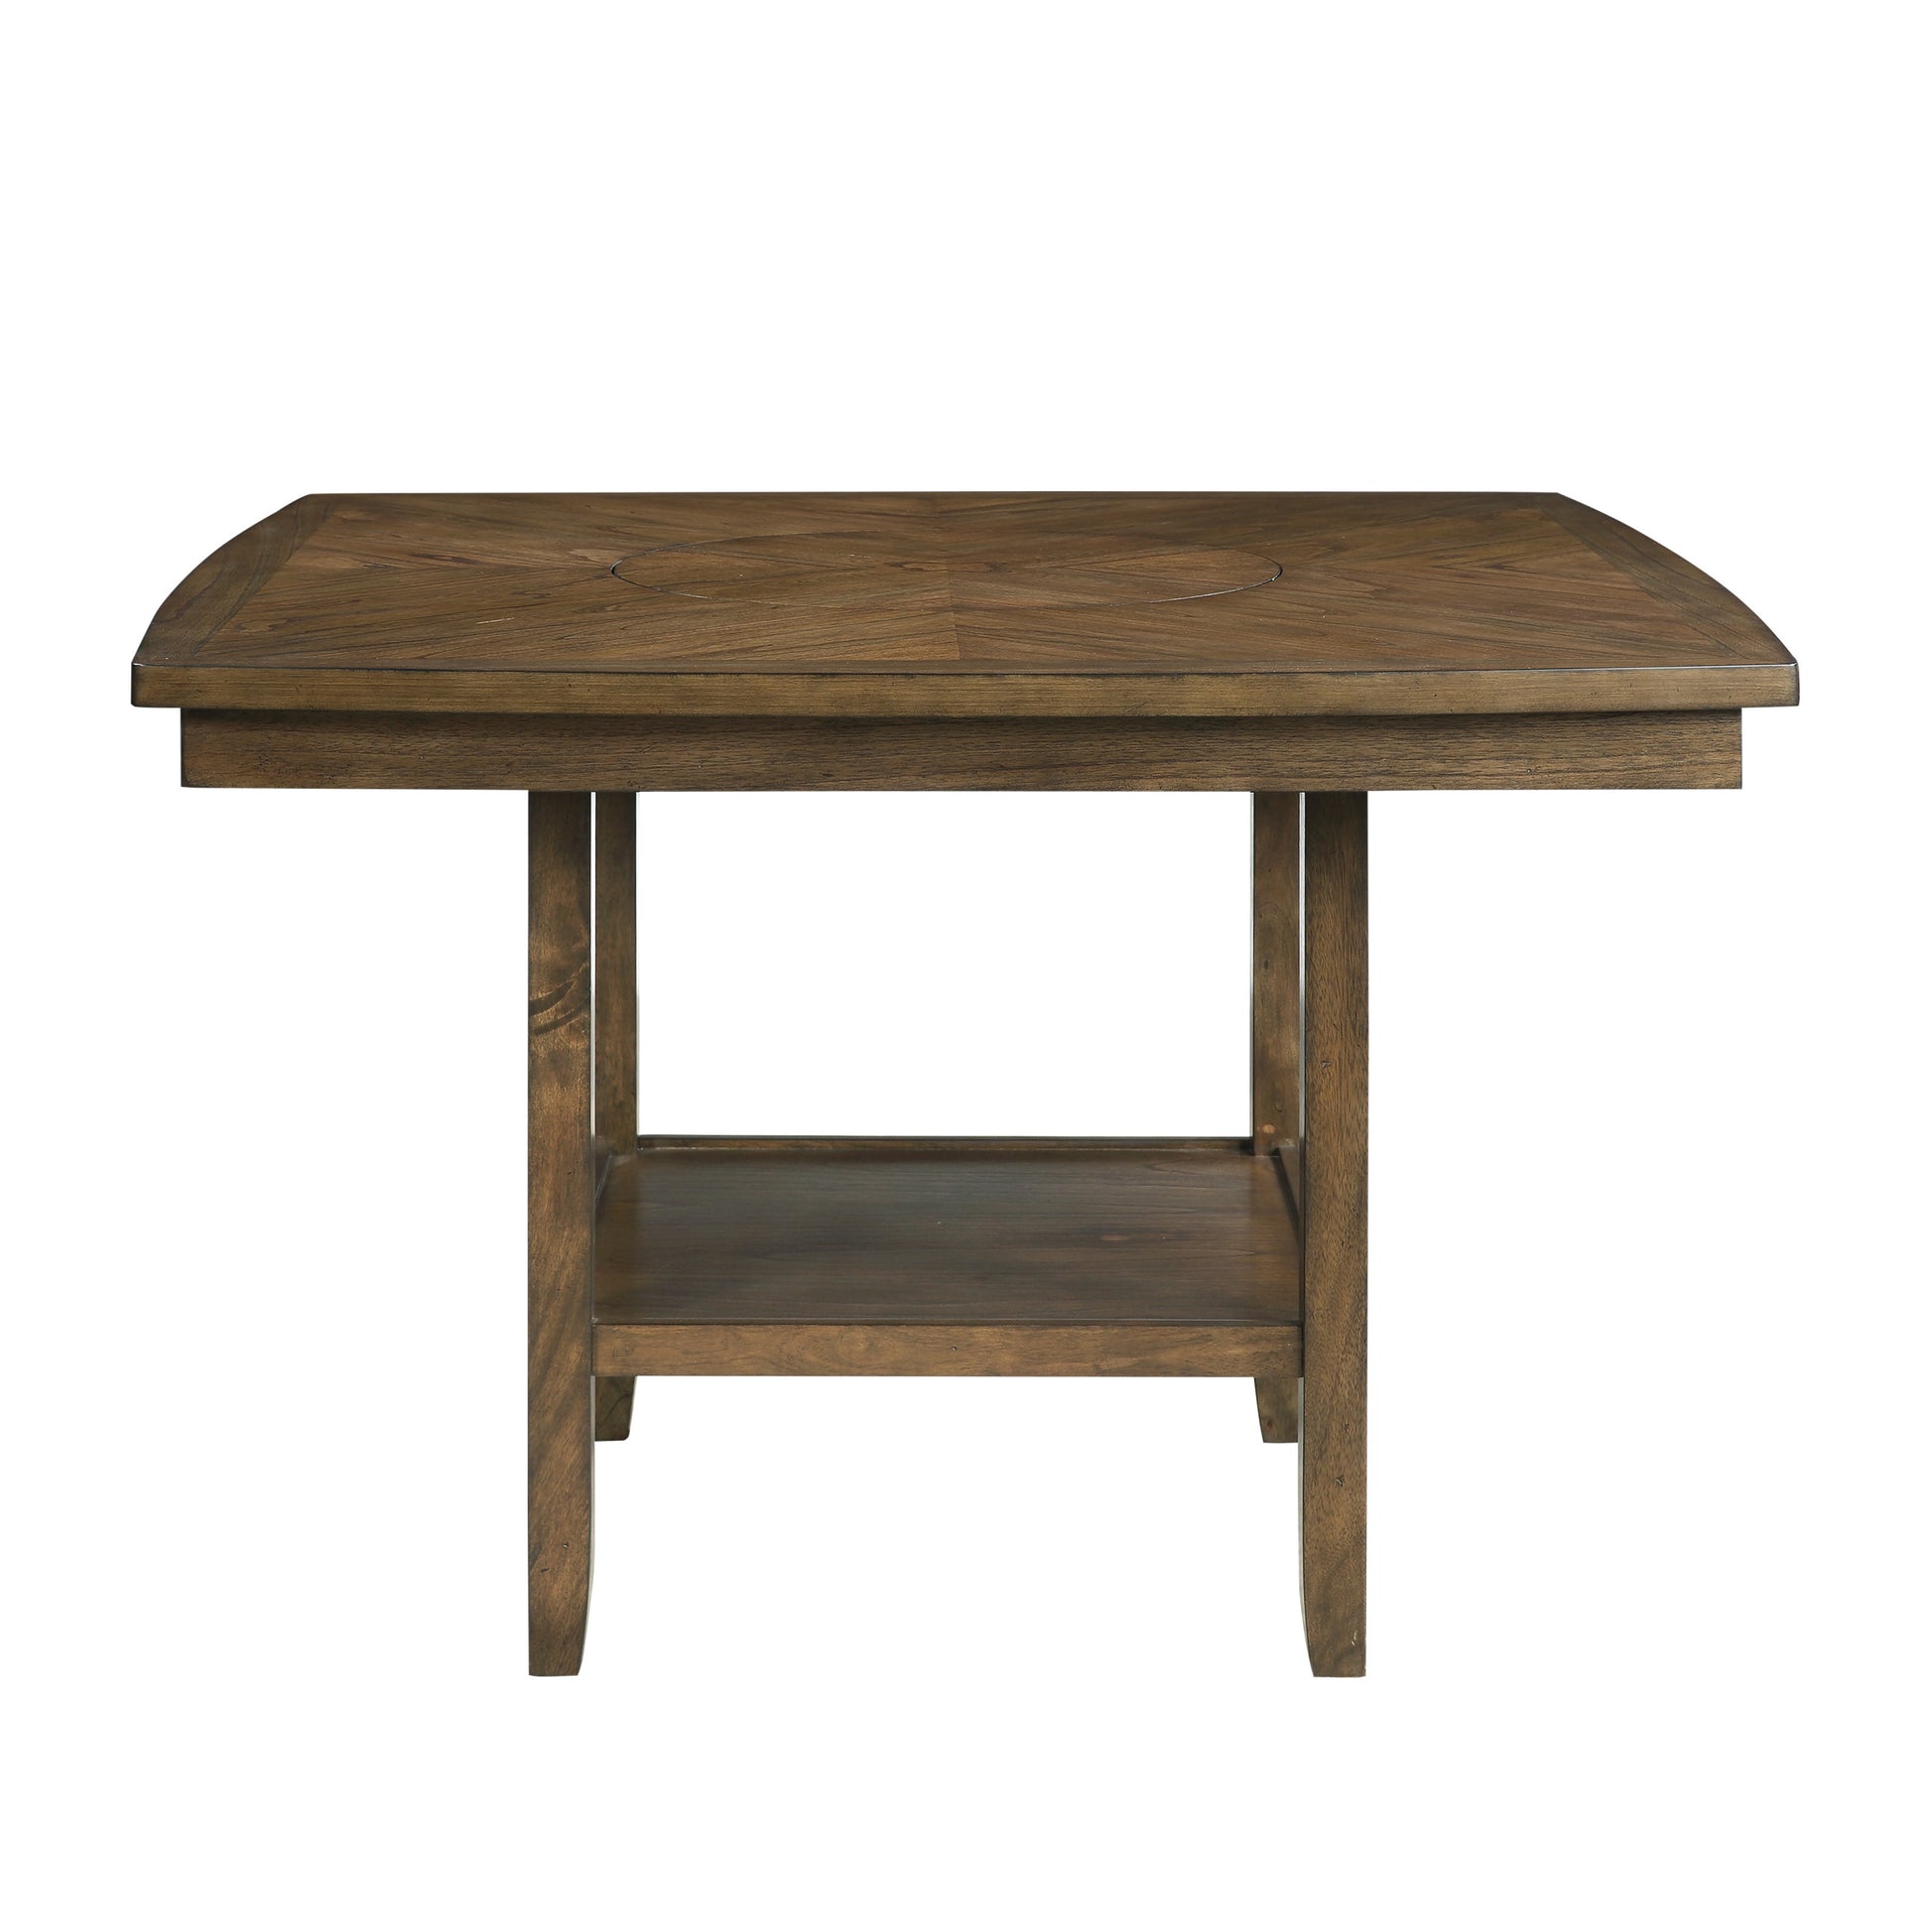 Light Oak Finish 1pc Counter height Table with light oak-dining room-wood